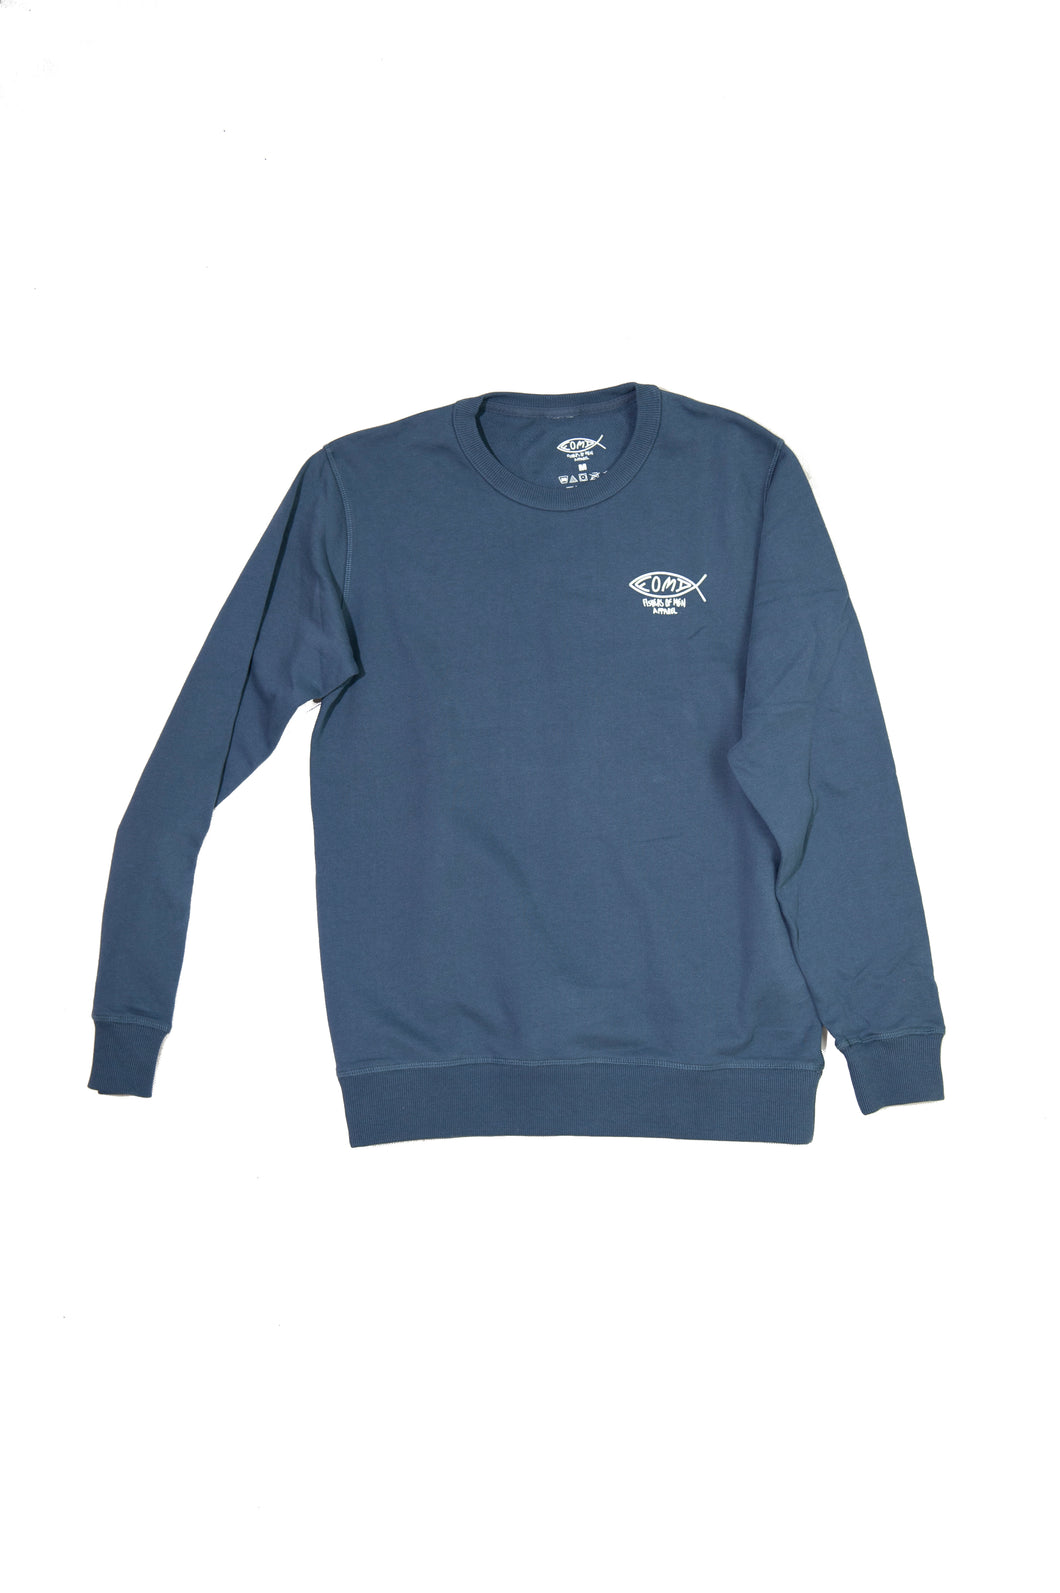 The image is of a faded navy blue crewneck sweatshirt. The front of the crewneck has the company logo of FOMA on it, which is a fish symbol with FOMA written inside, and 